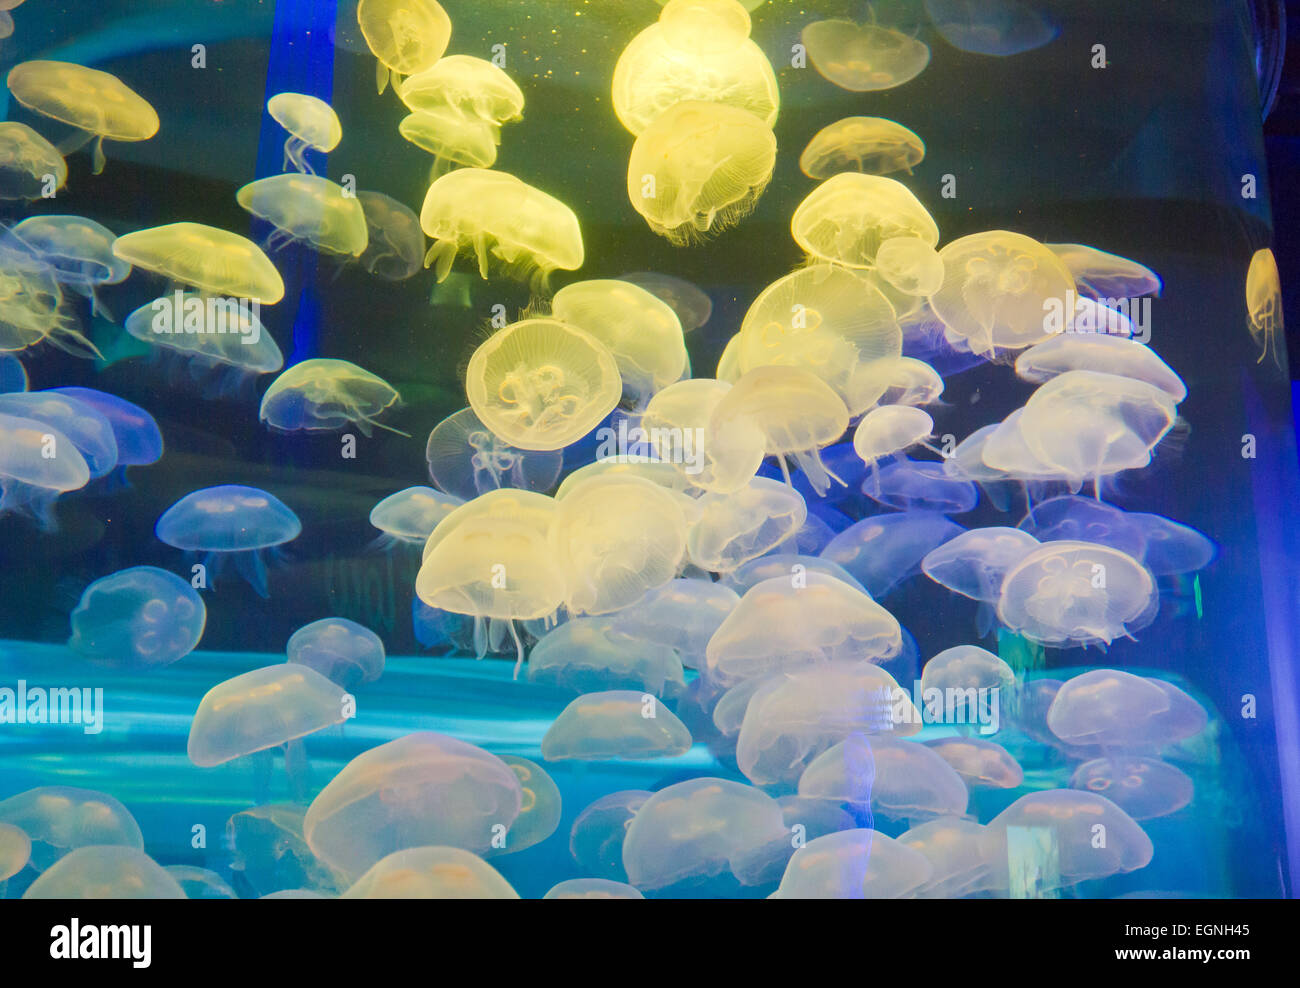 Moon jellyfish in an aquarium illuminated by colored light. Stock Photo